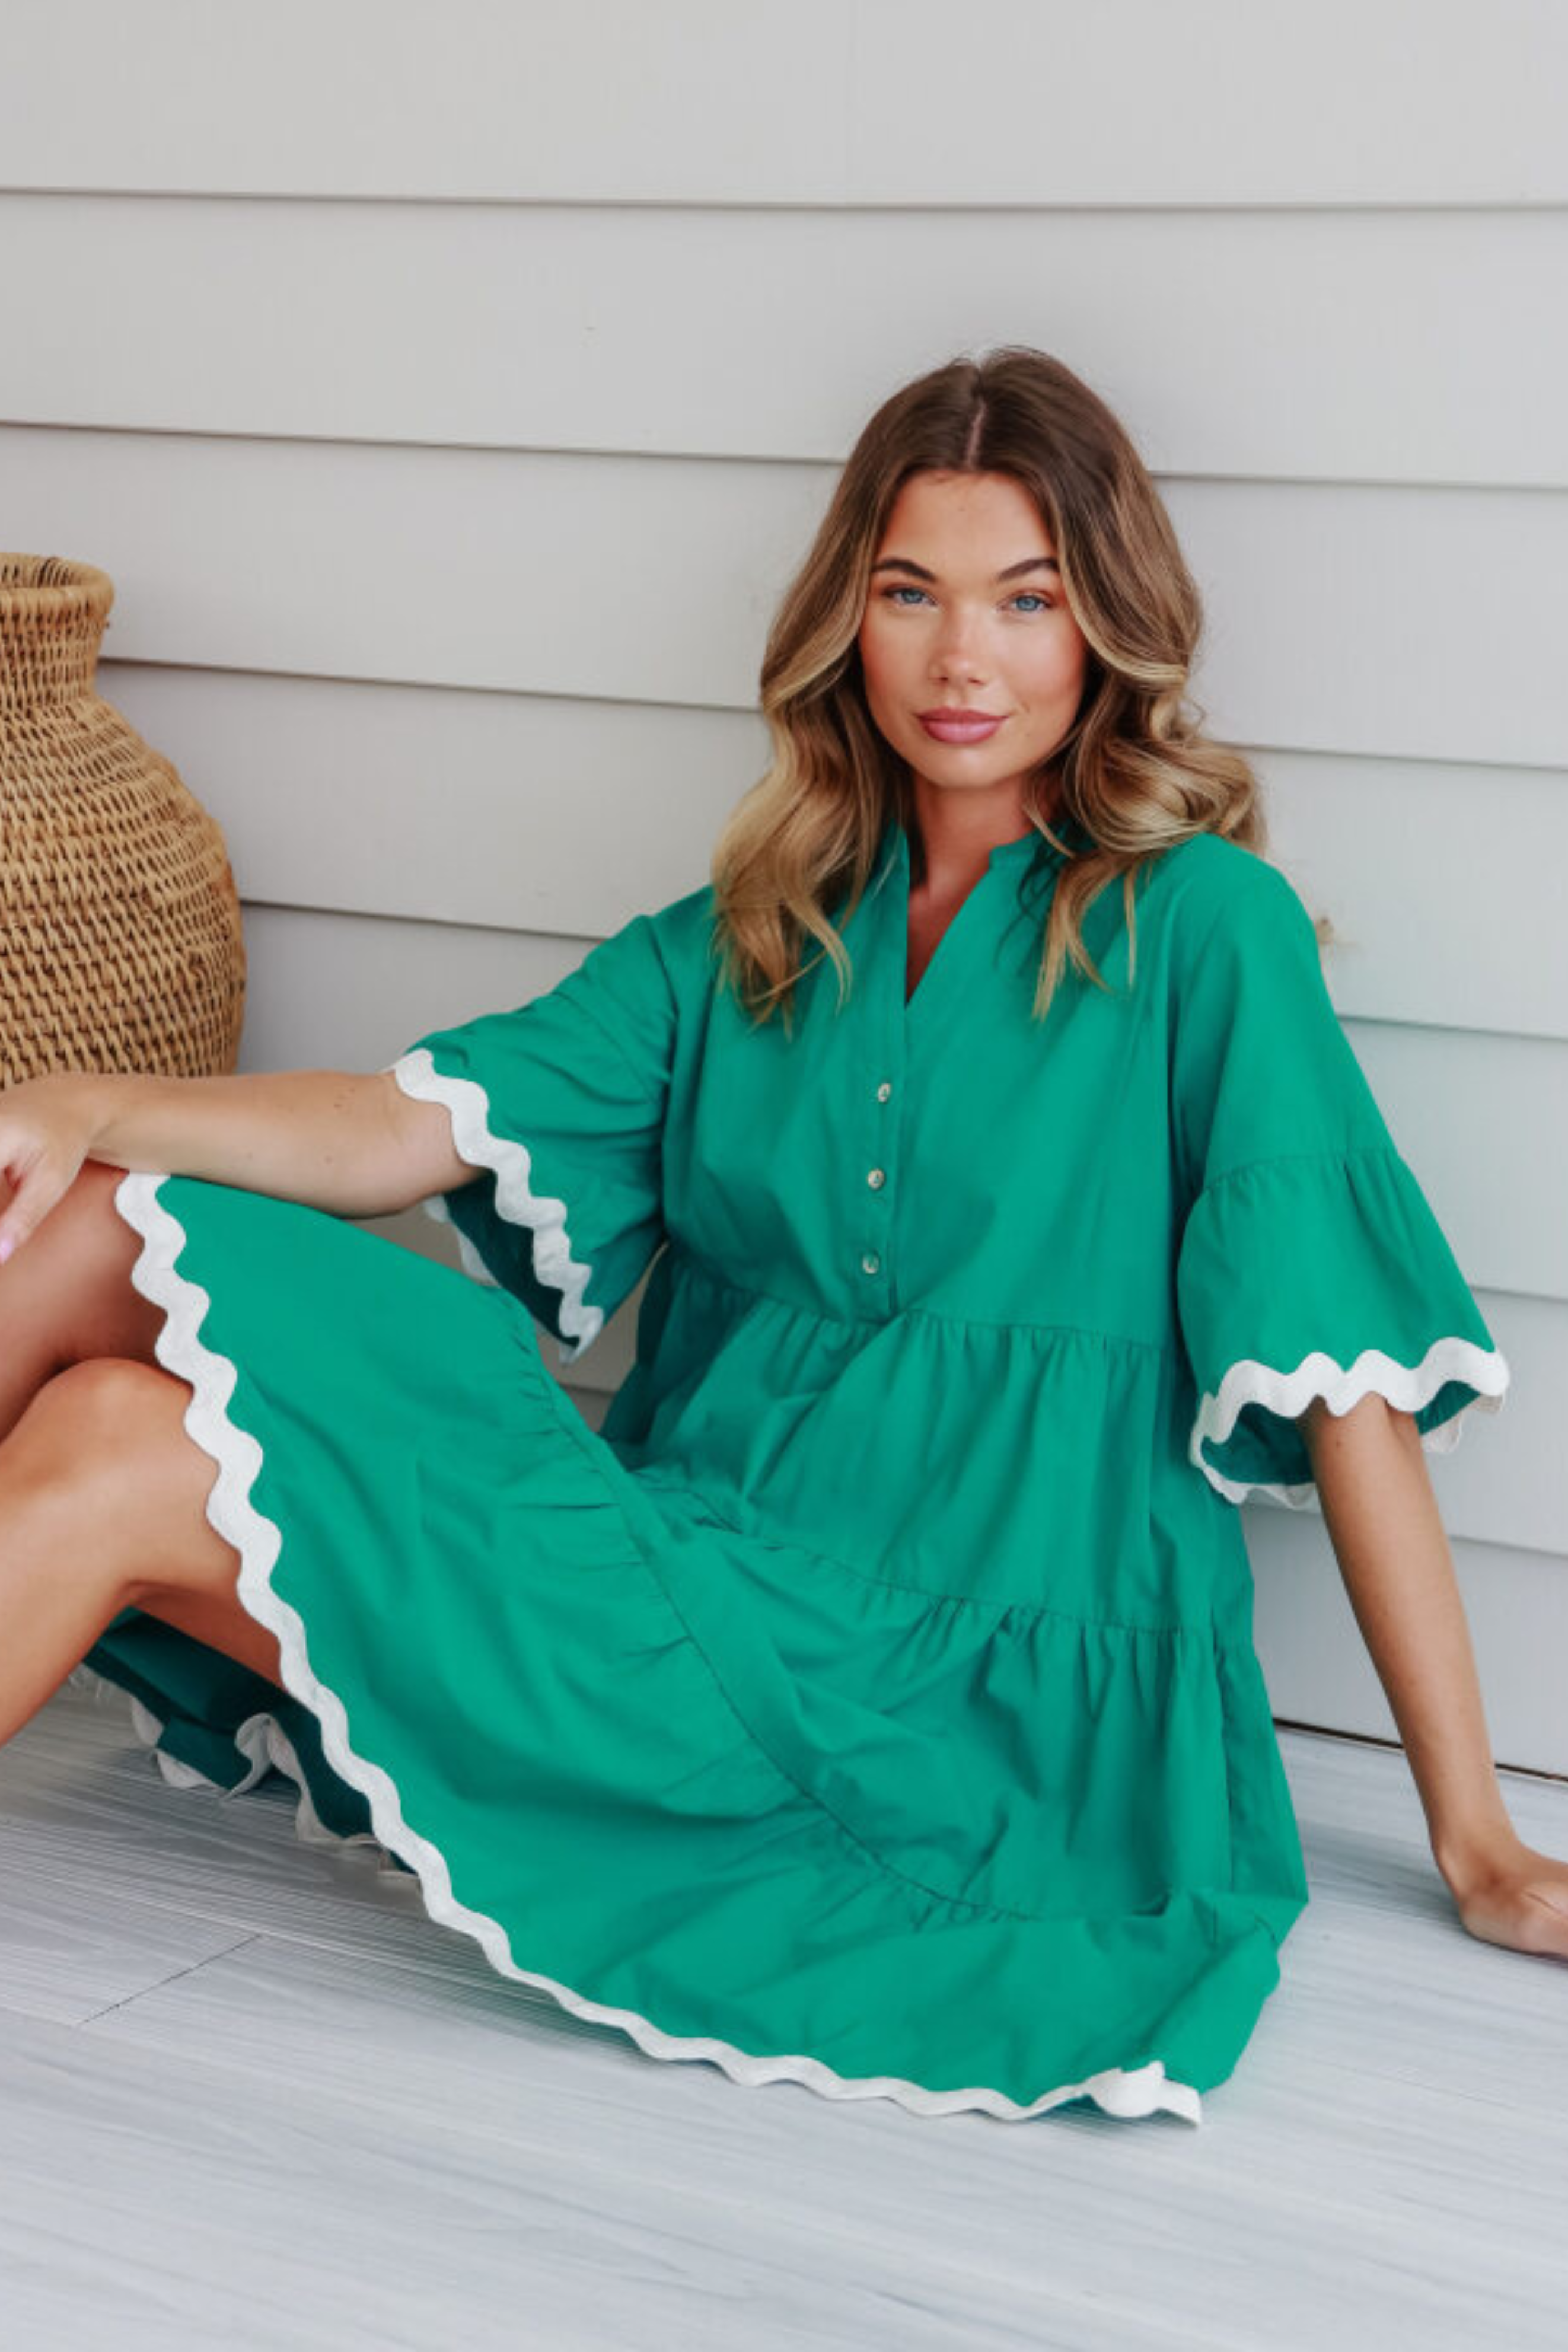 ABIGAIL Dress in Emerald Green and White